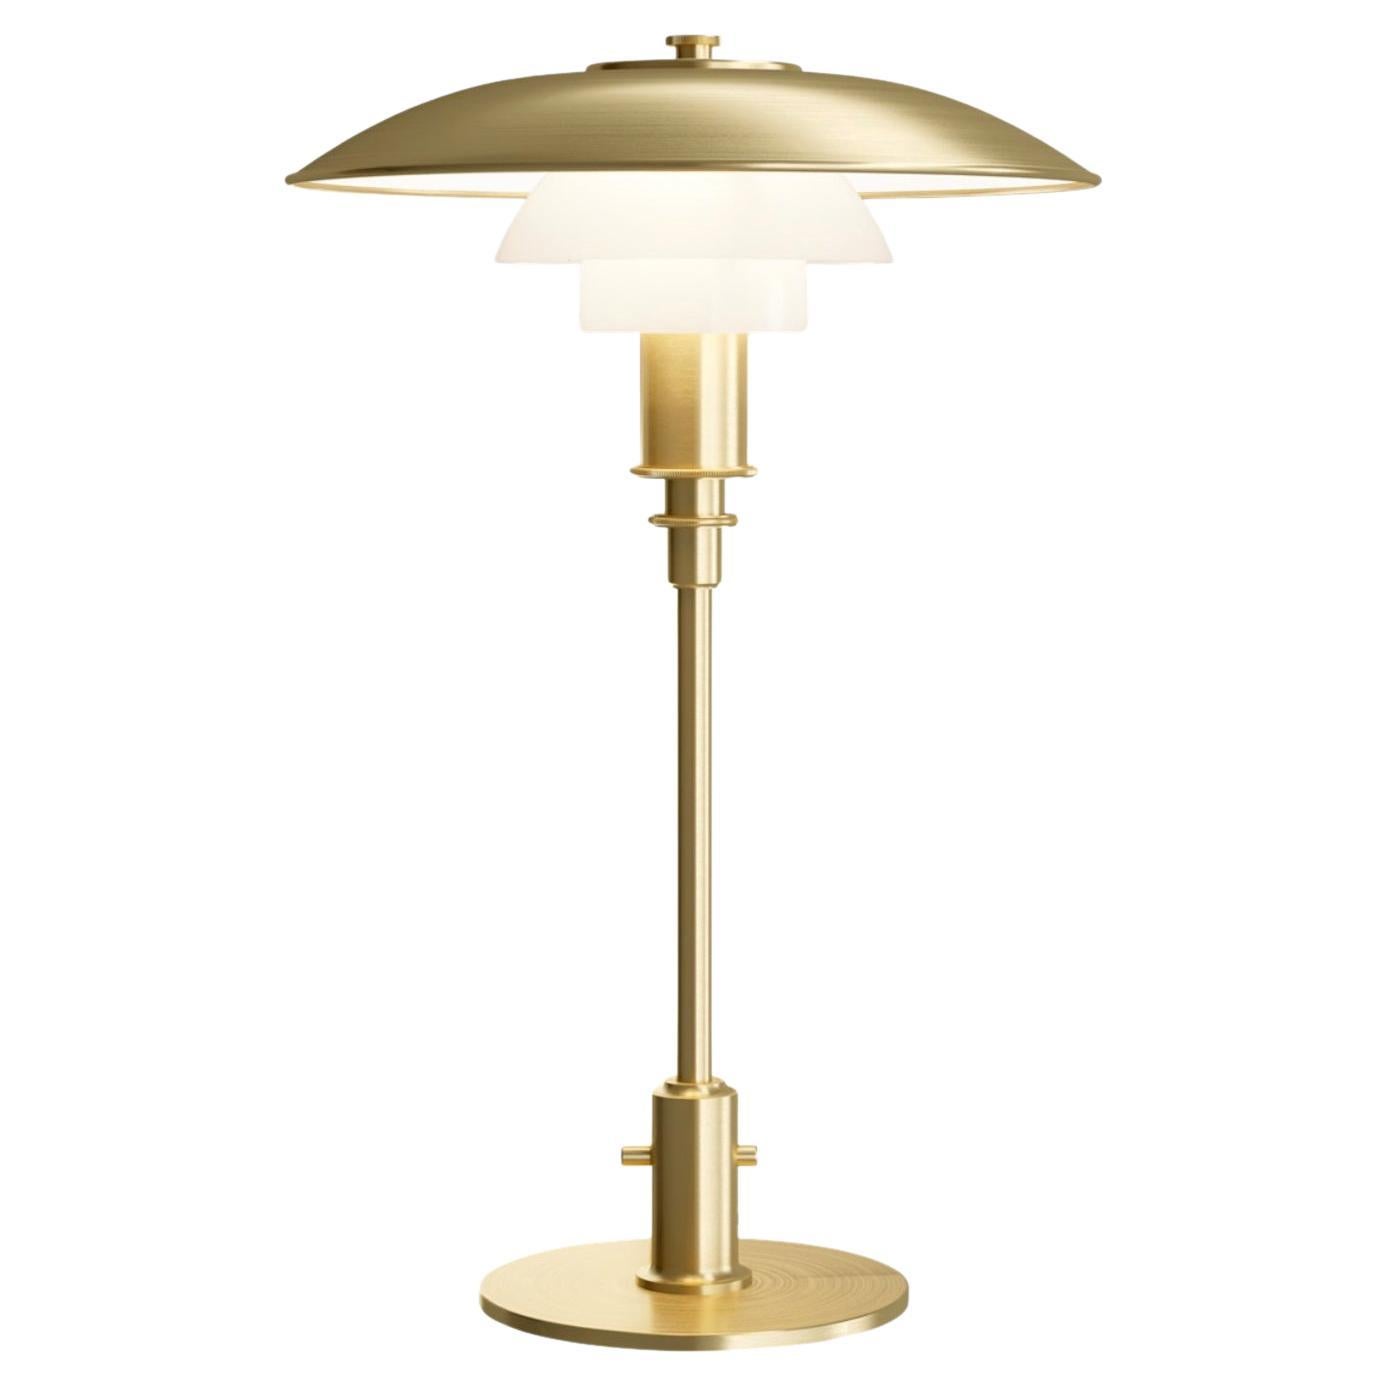 Poul Henningsen PH 3/2 in Brass and Opaline Glass Limited Edition For Sale